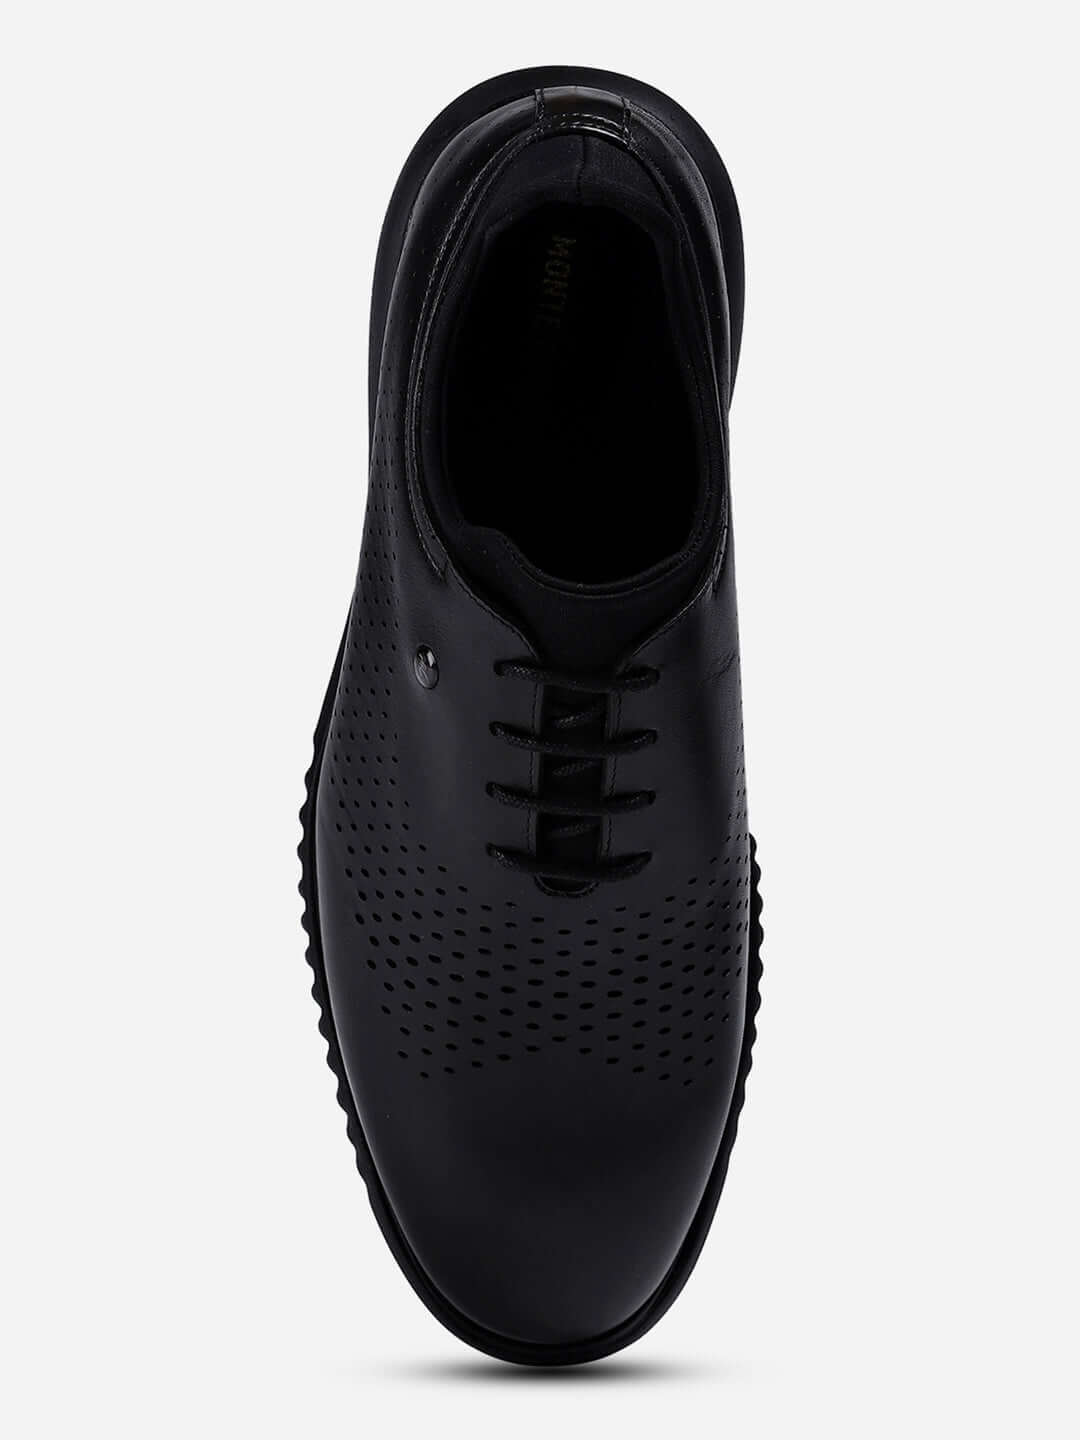 Men Black Lace Up Genuine Leather Casual Shoes